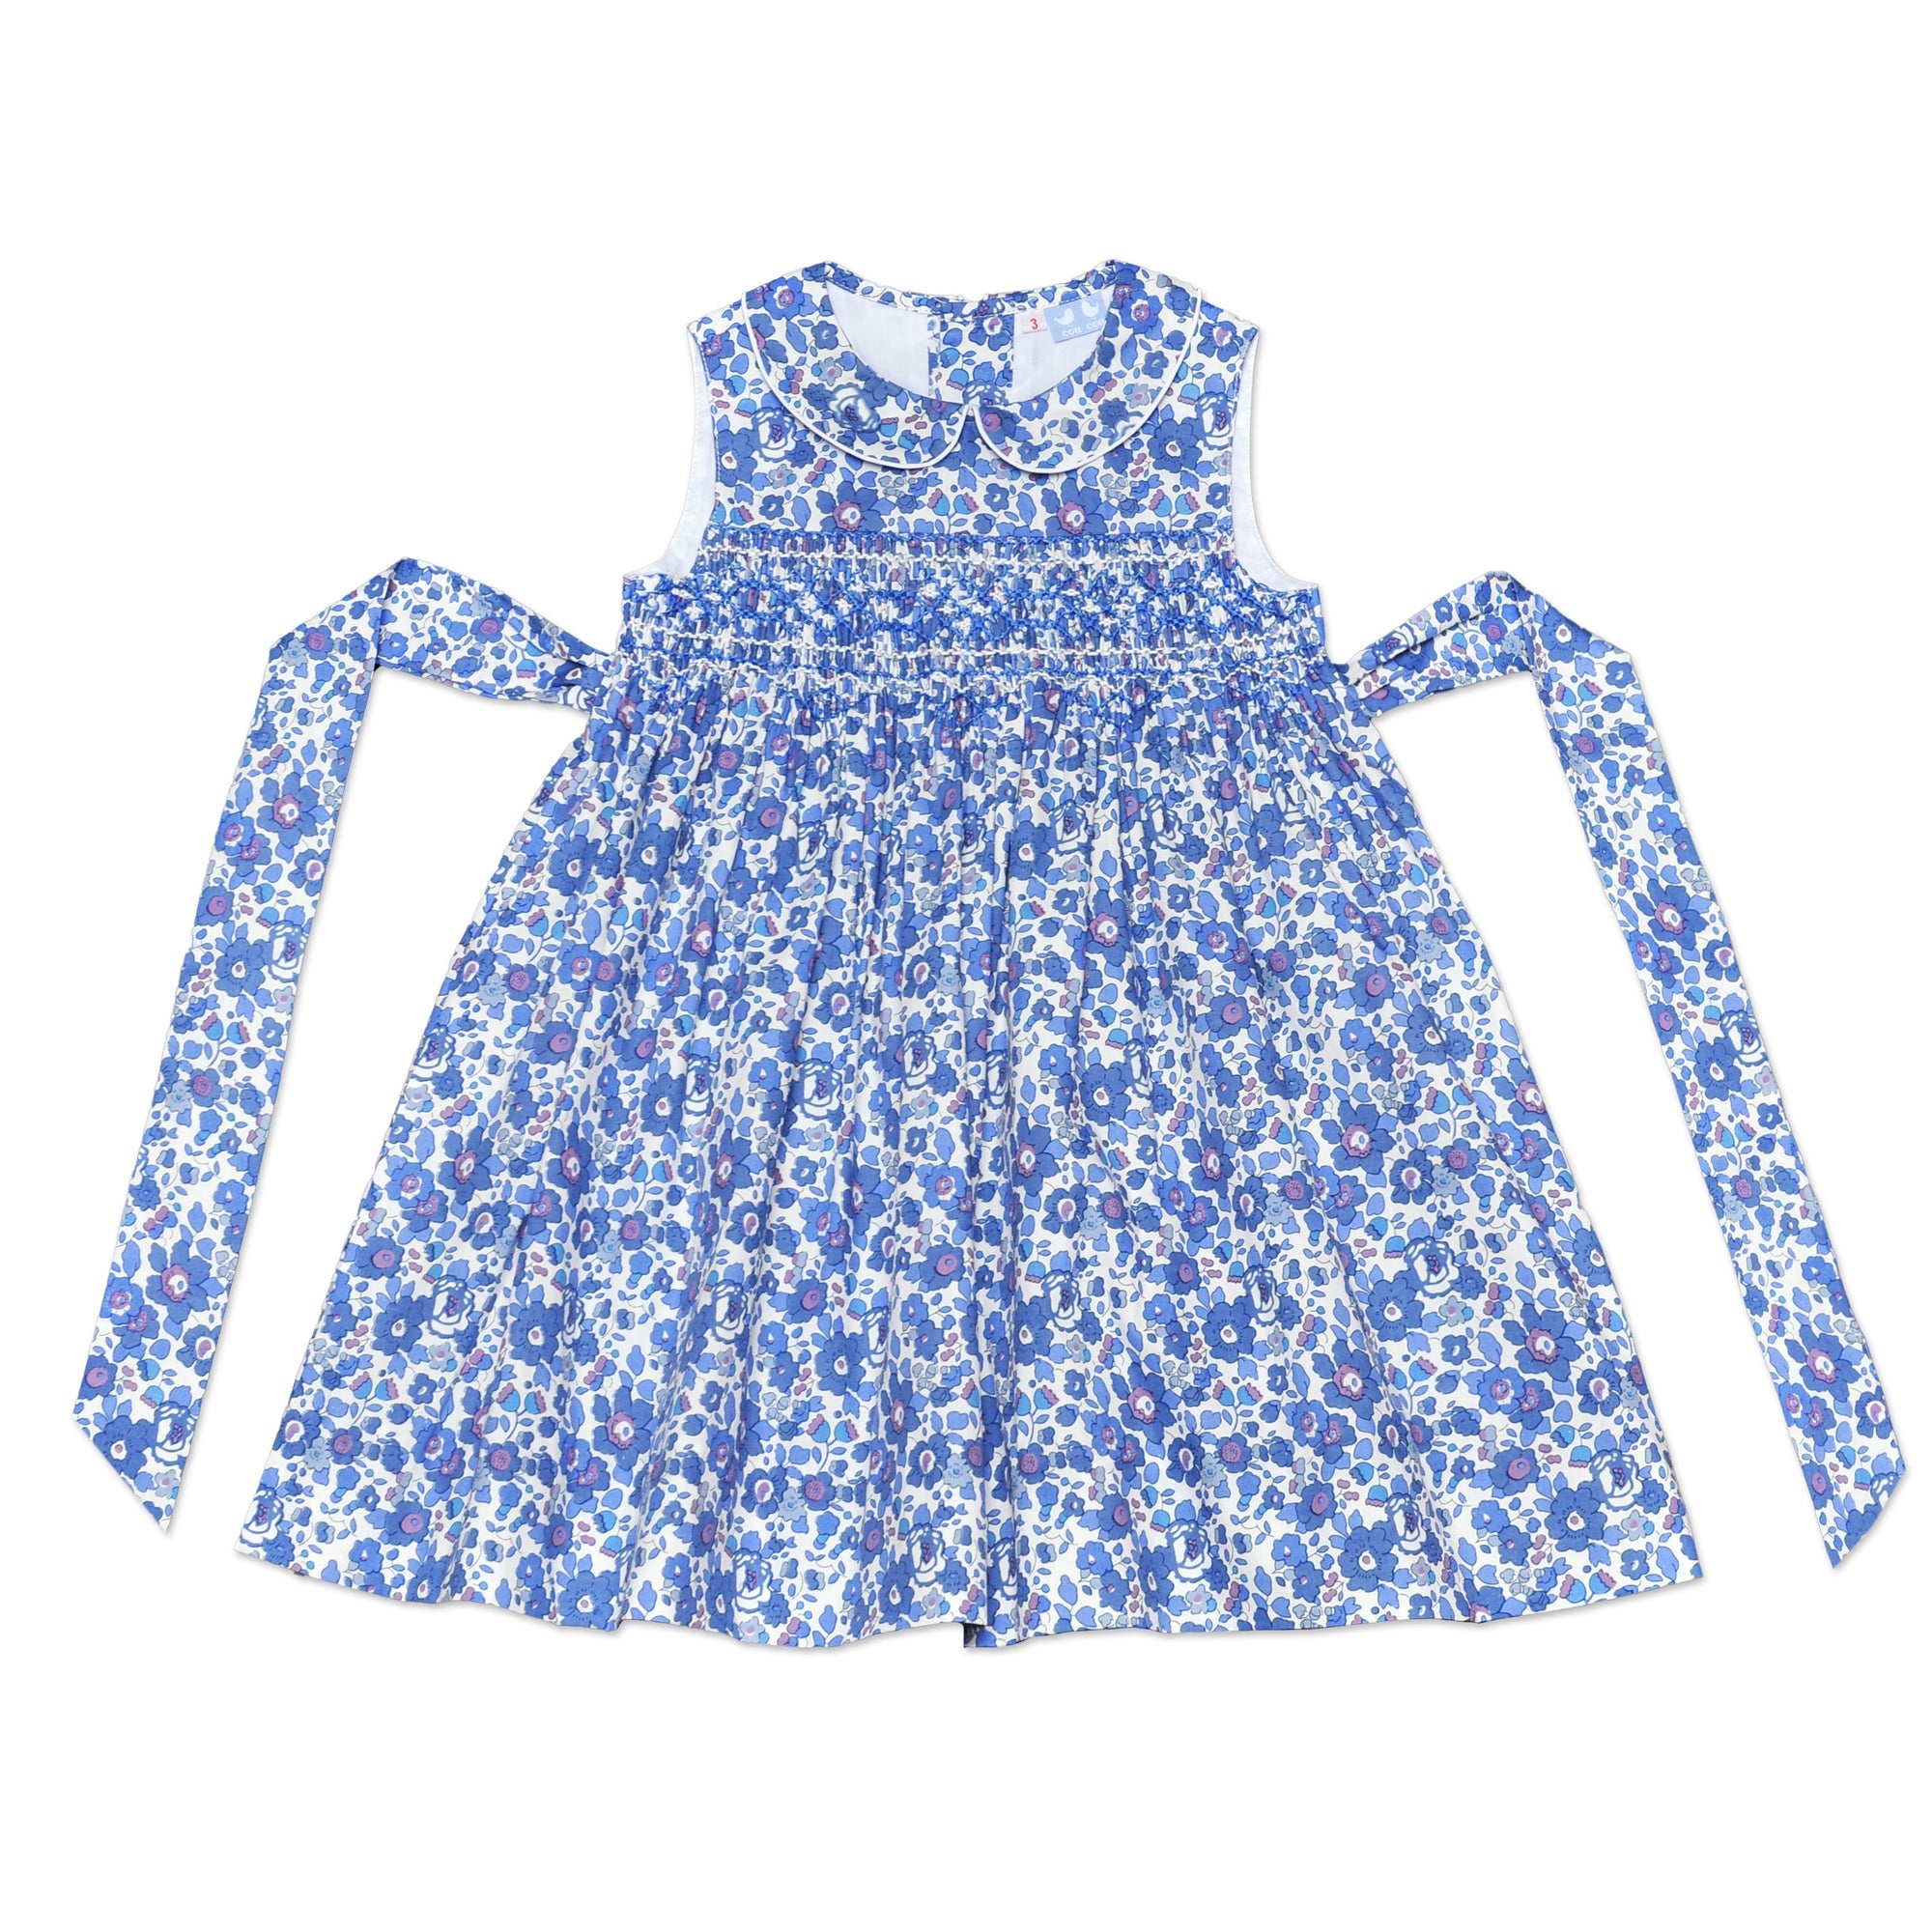 Bella Navy And Blue Liberty Print Smock Dress - Cou Cou Baby